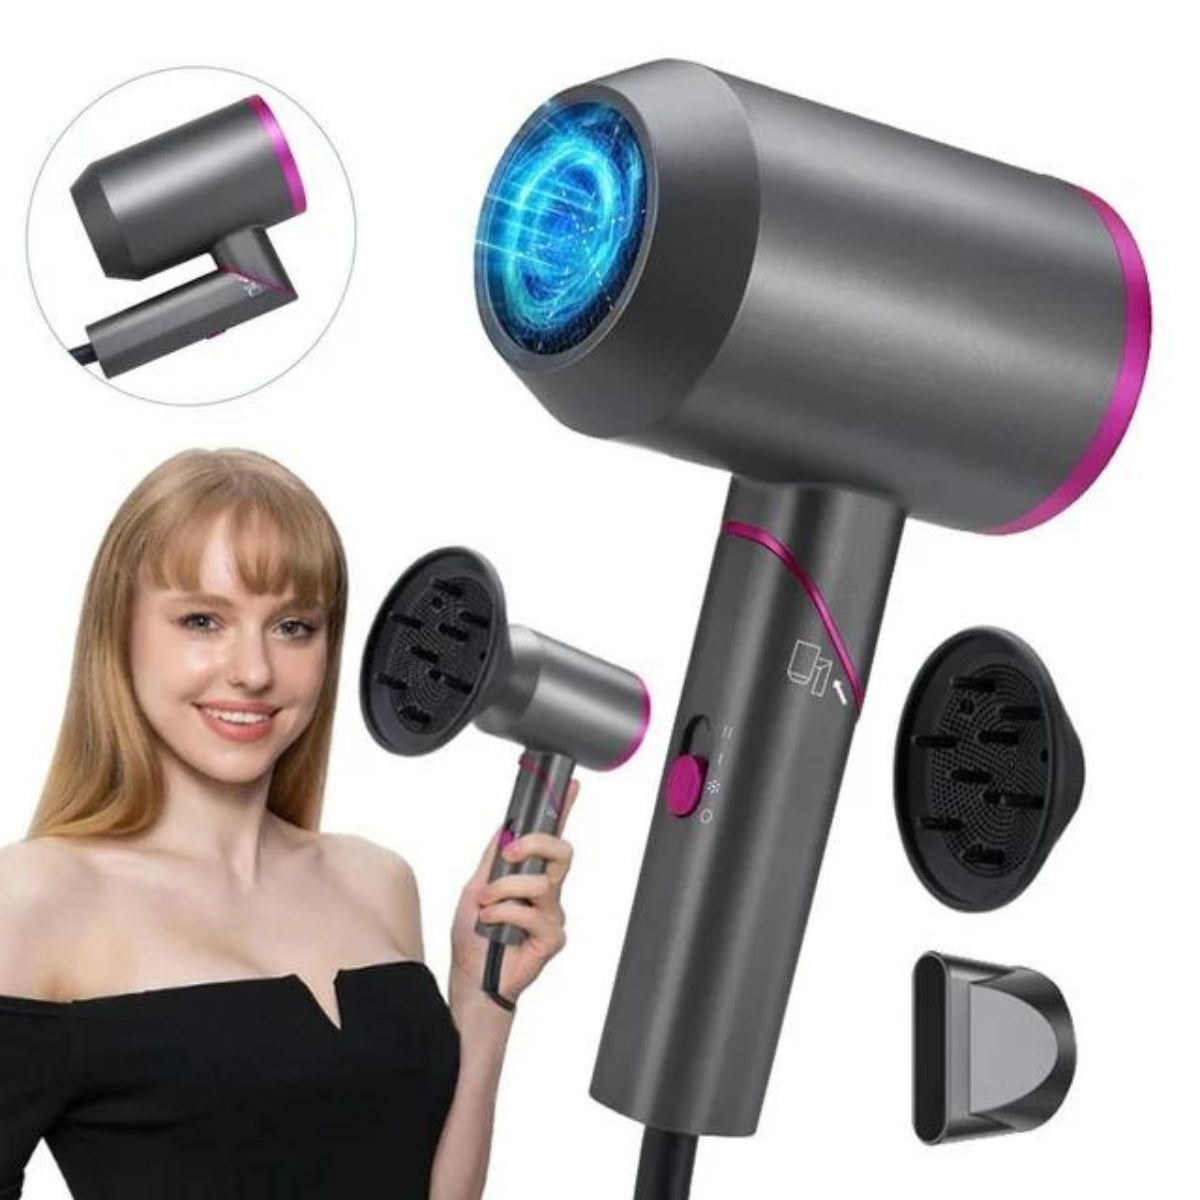 Professional 1800W DC Hair Dryer with Quick-Dry Technology